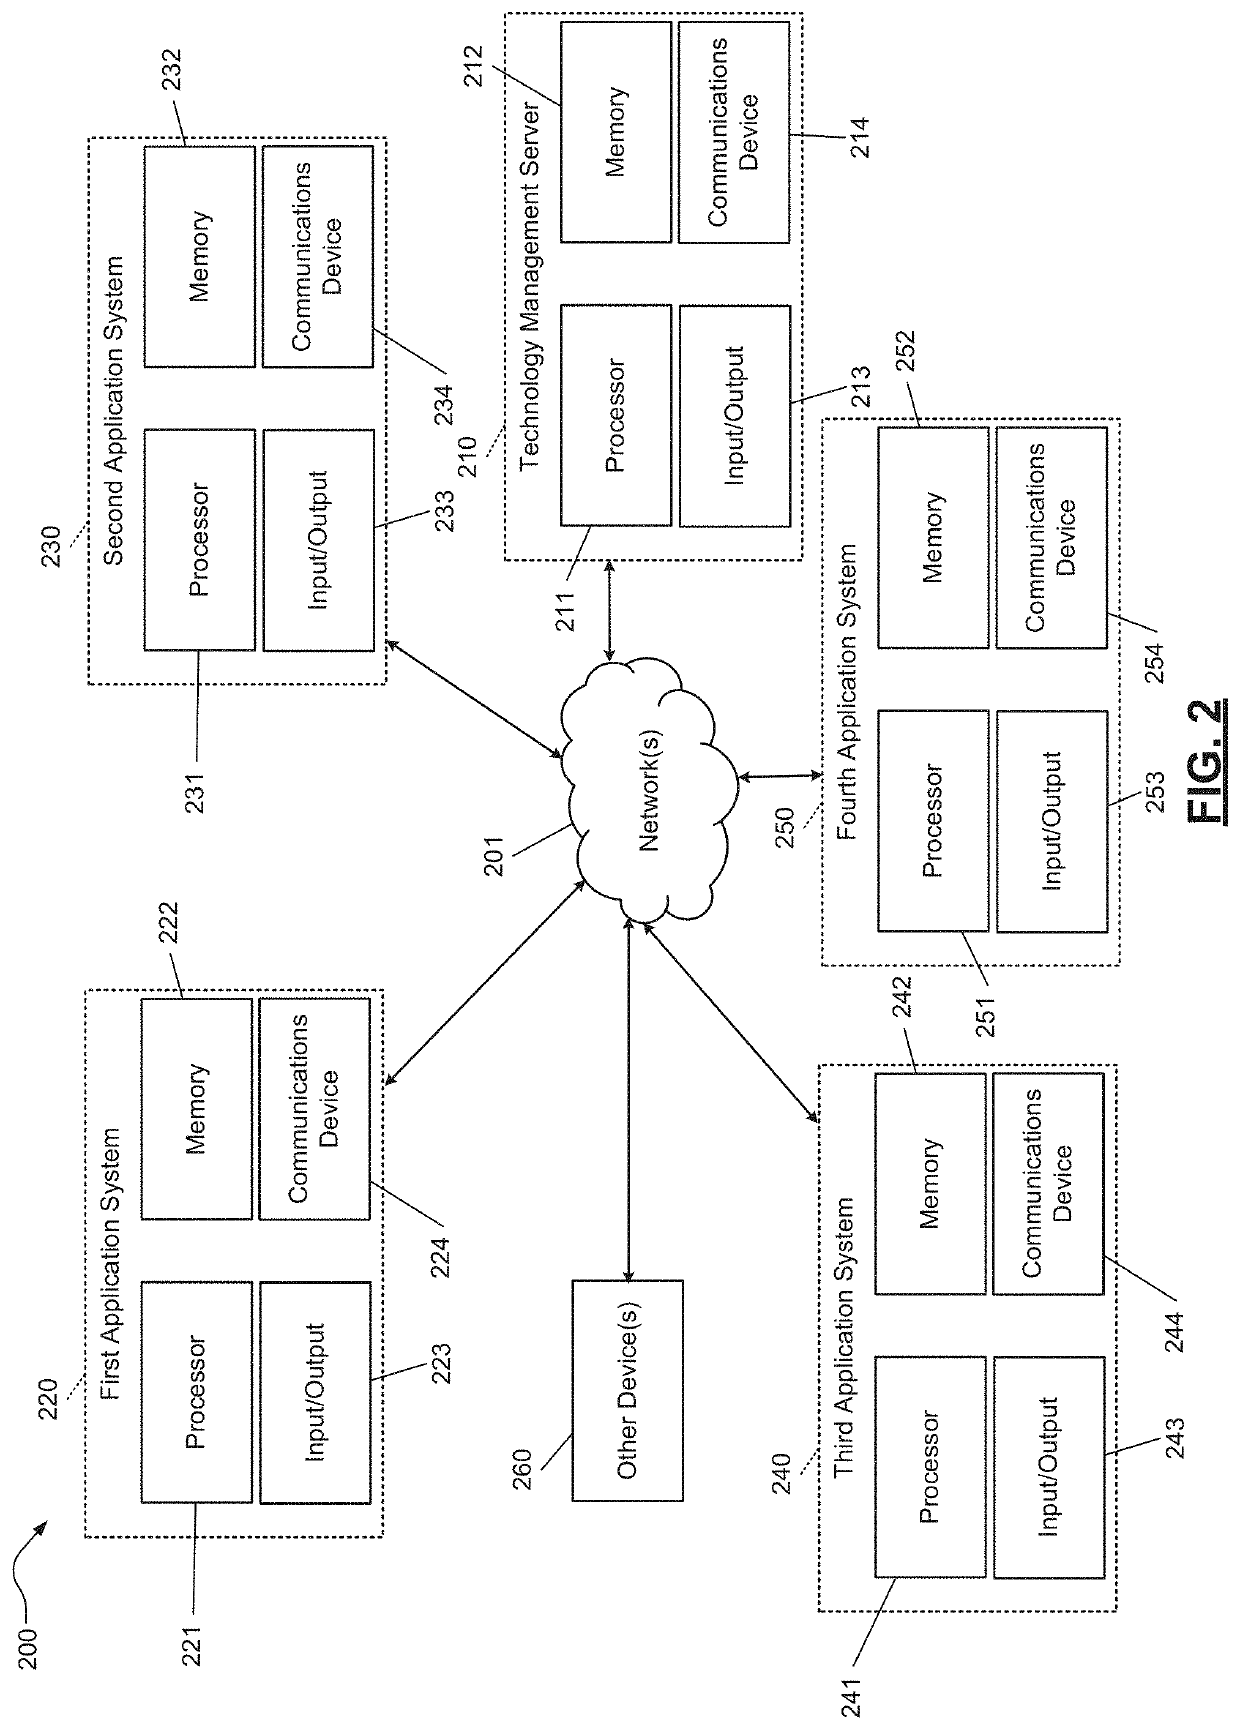 Systems and methods for generating and managing domain-based technology architecture